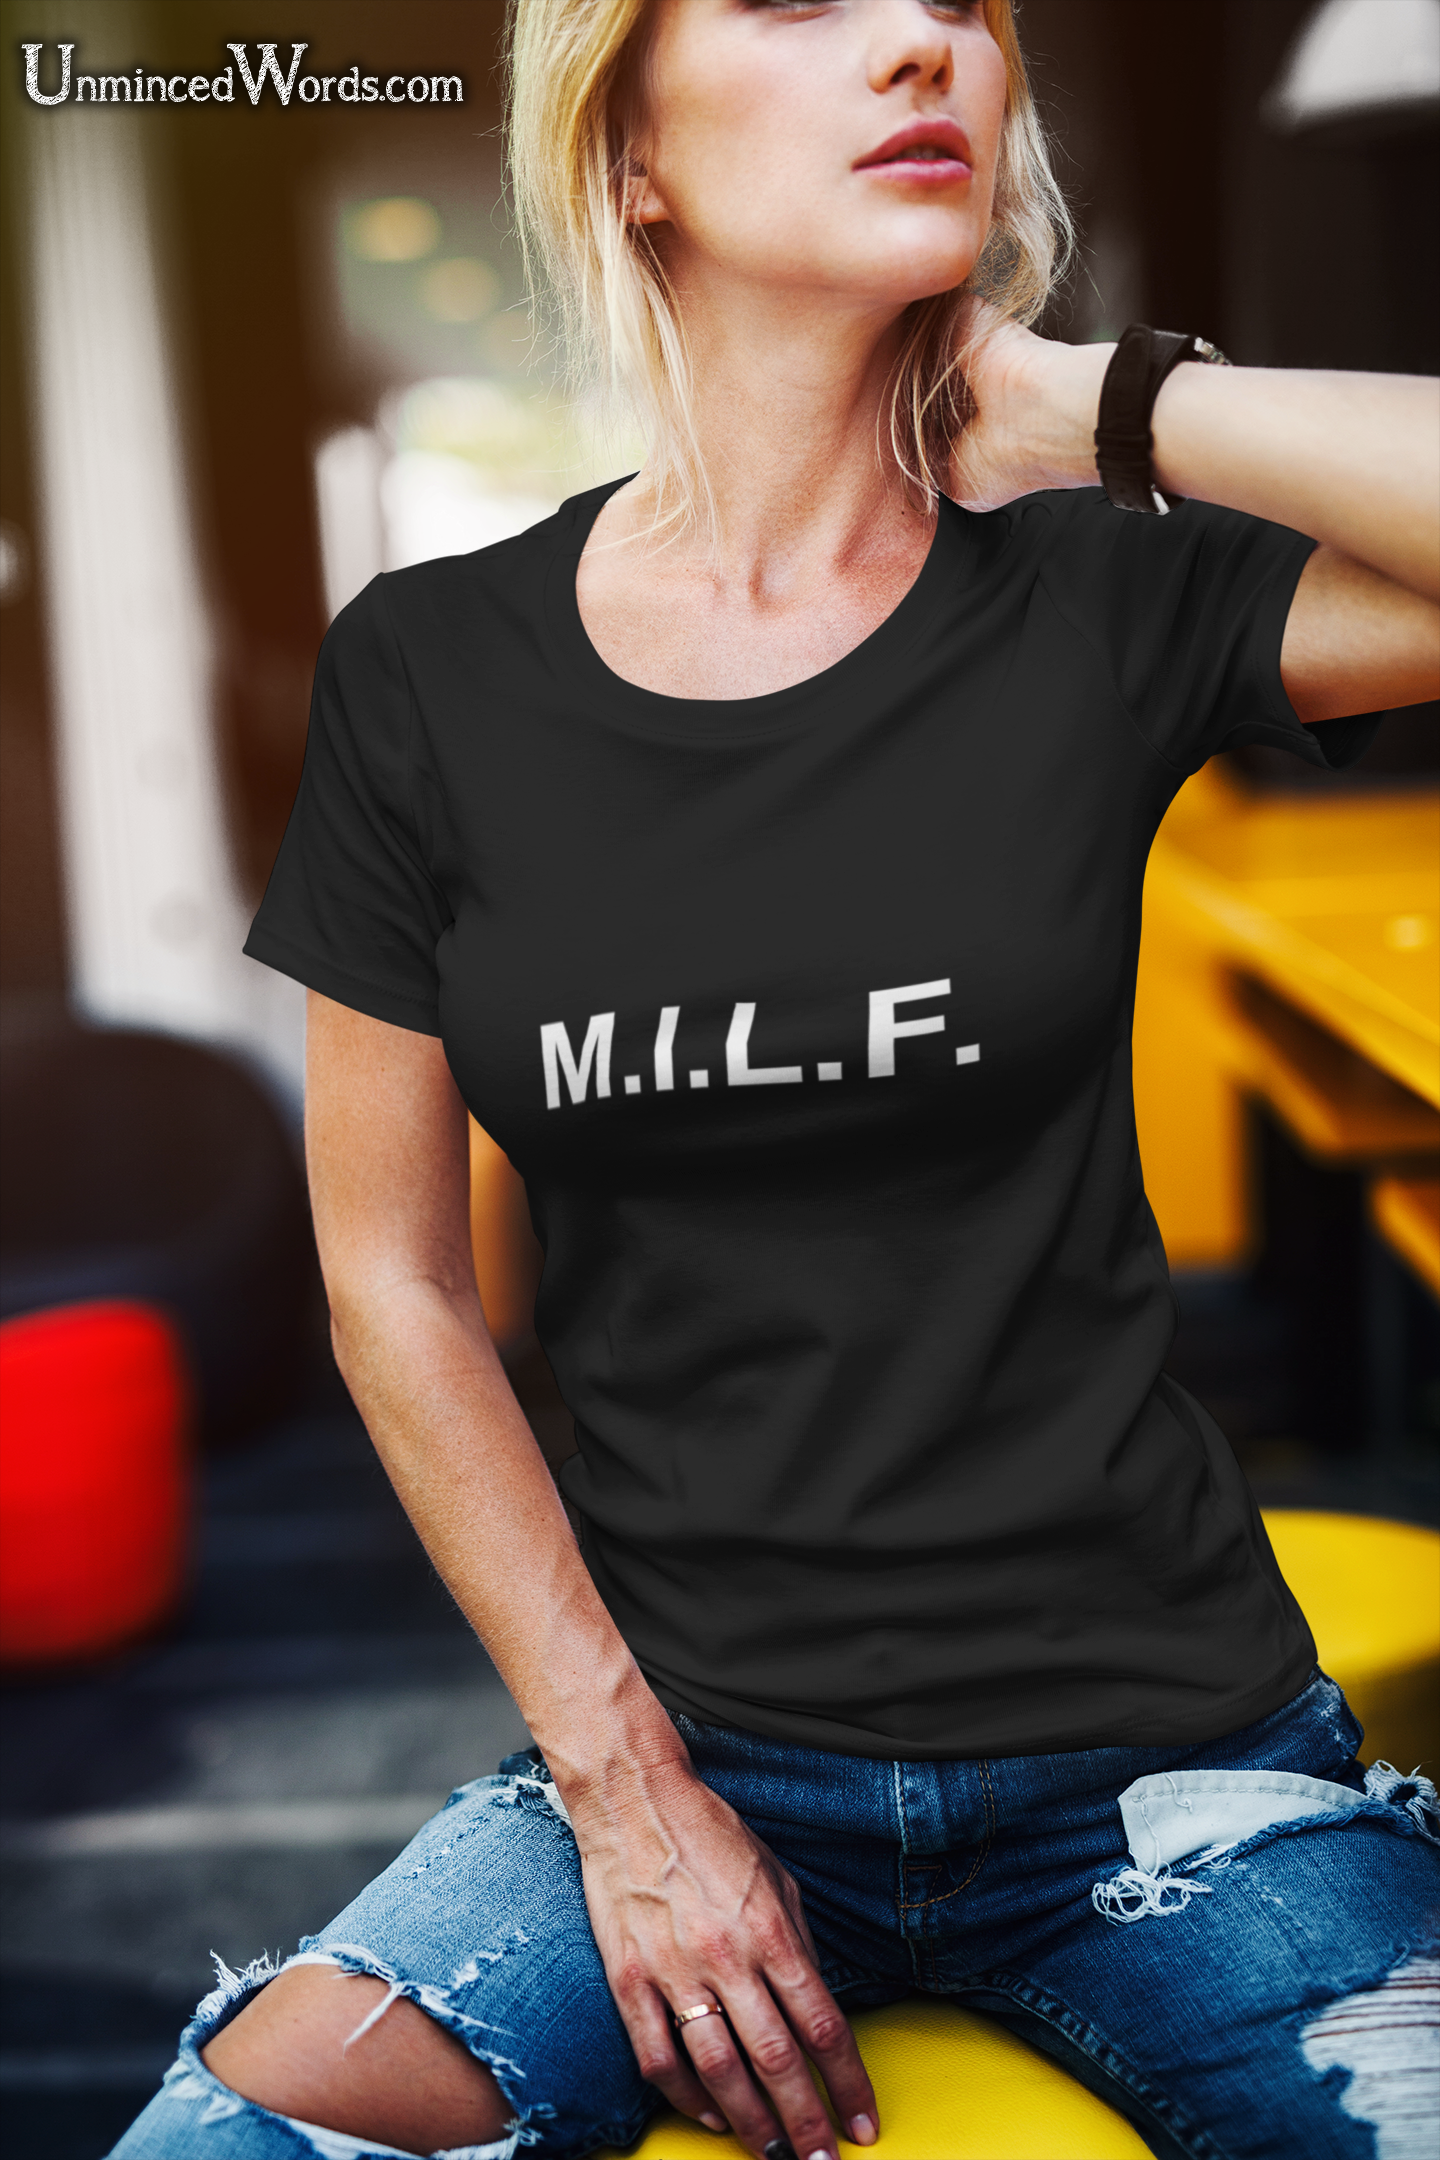 For that special someone, our MILF design is perfect